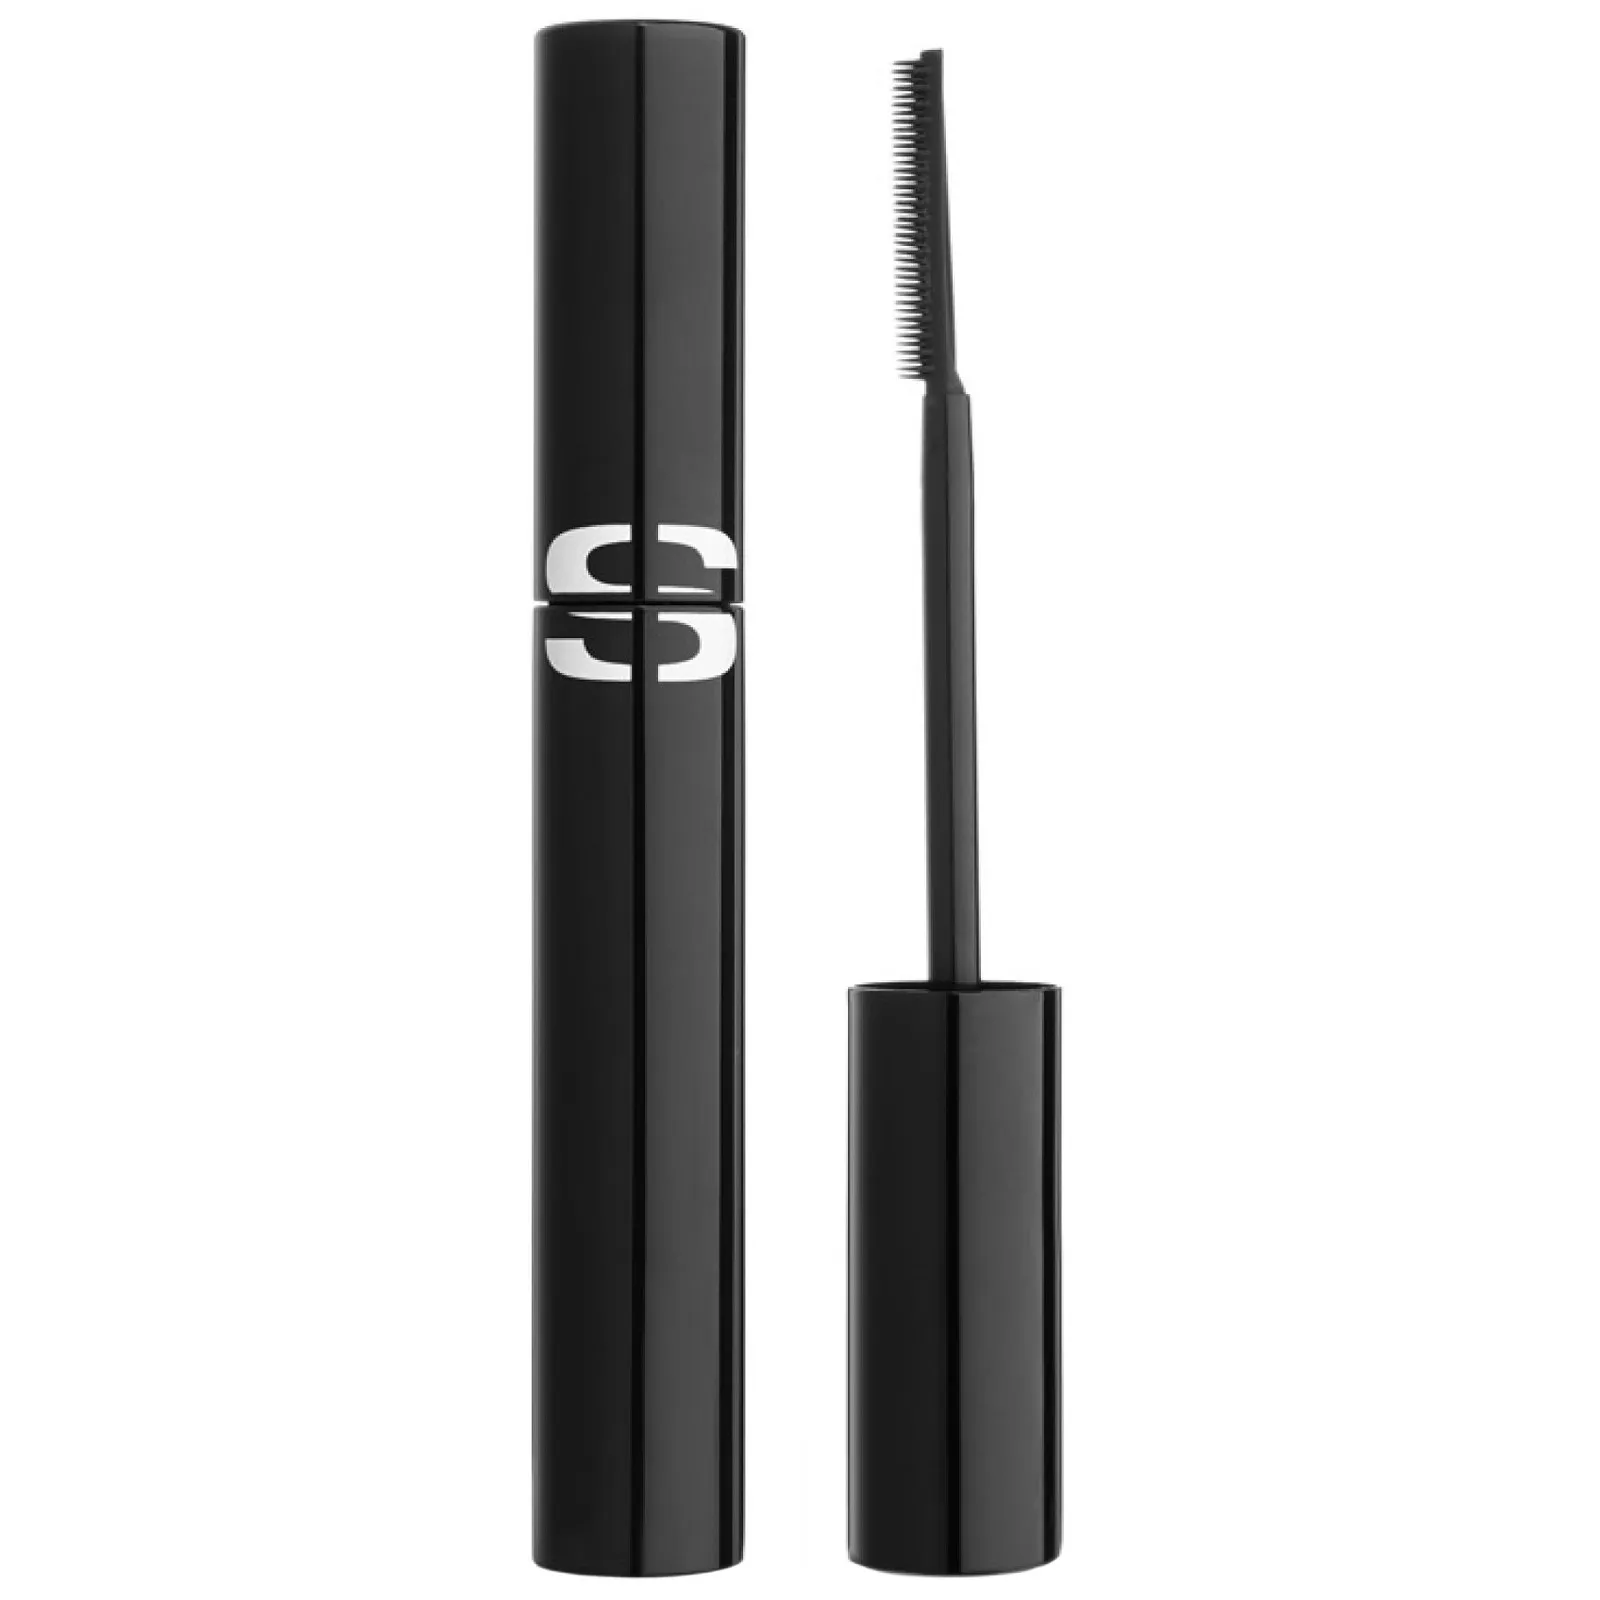 So Intense Mascara by Sisley, the best fortifying French mascara.